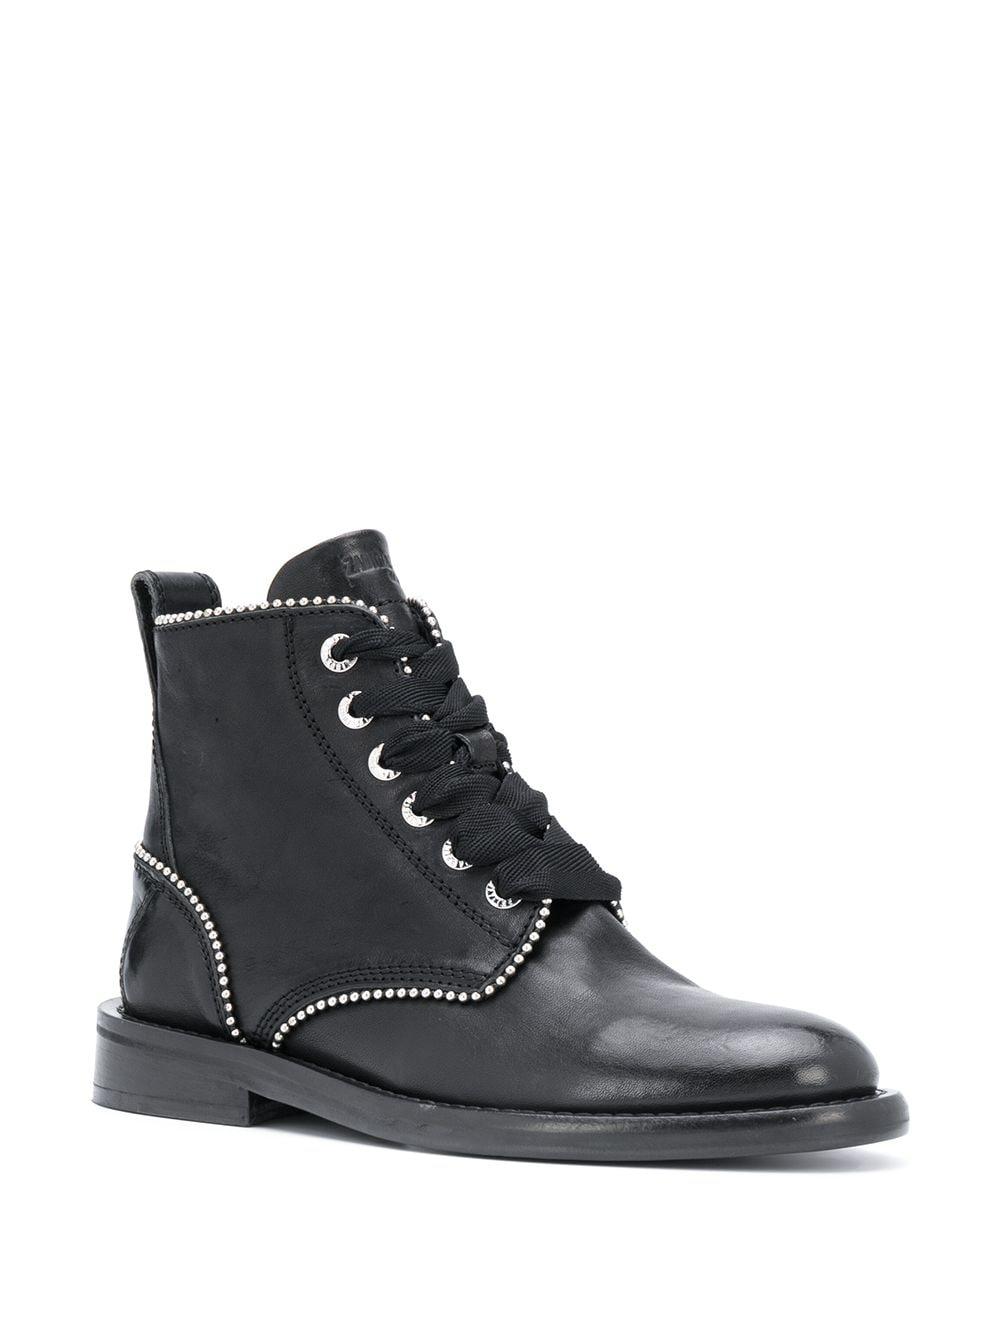 Zadig & Voltaire Studded Lace-up Leather Boots in Black - Lyst